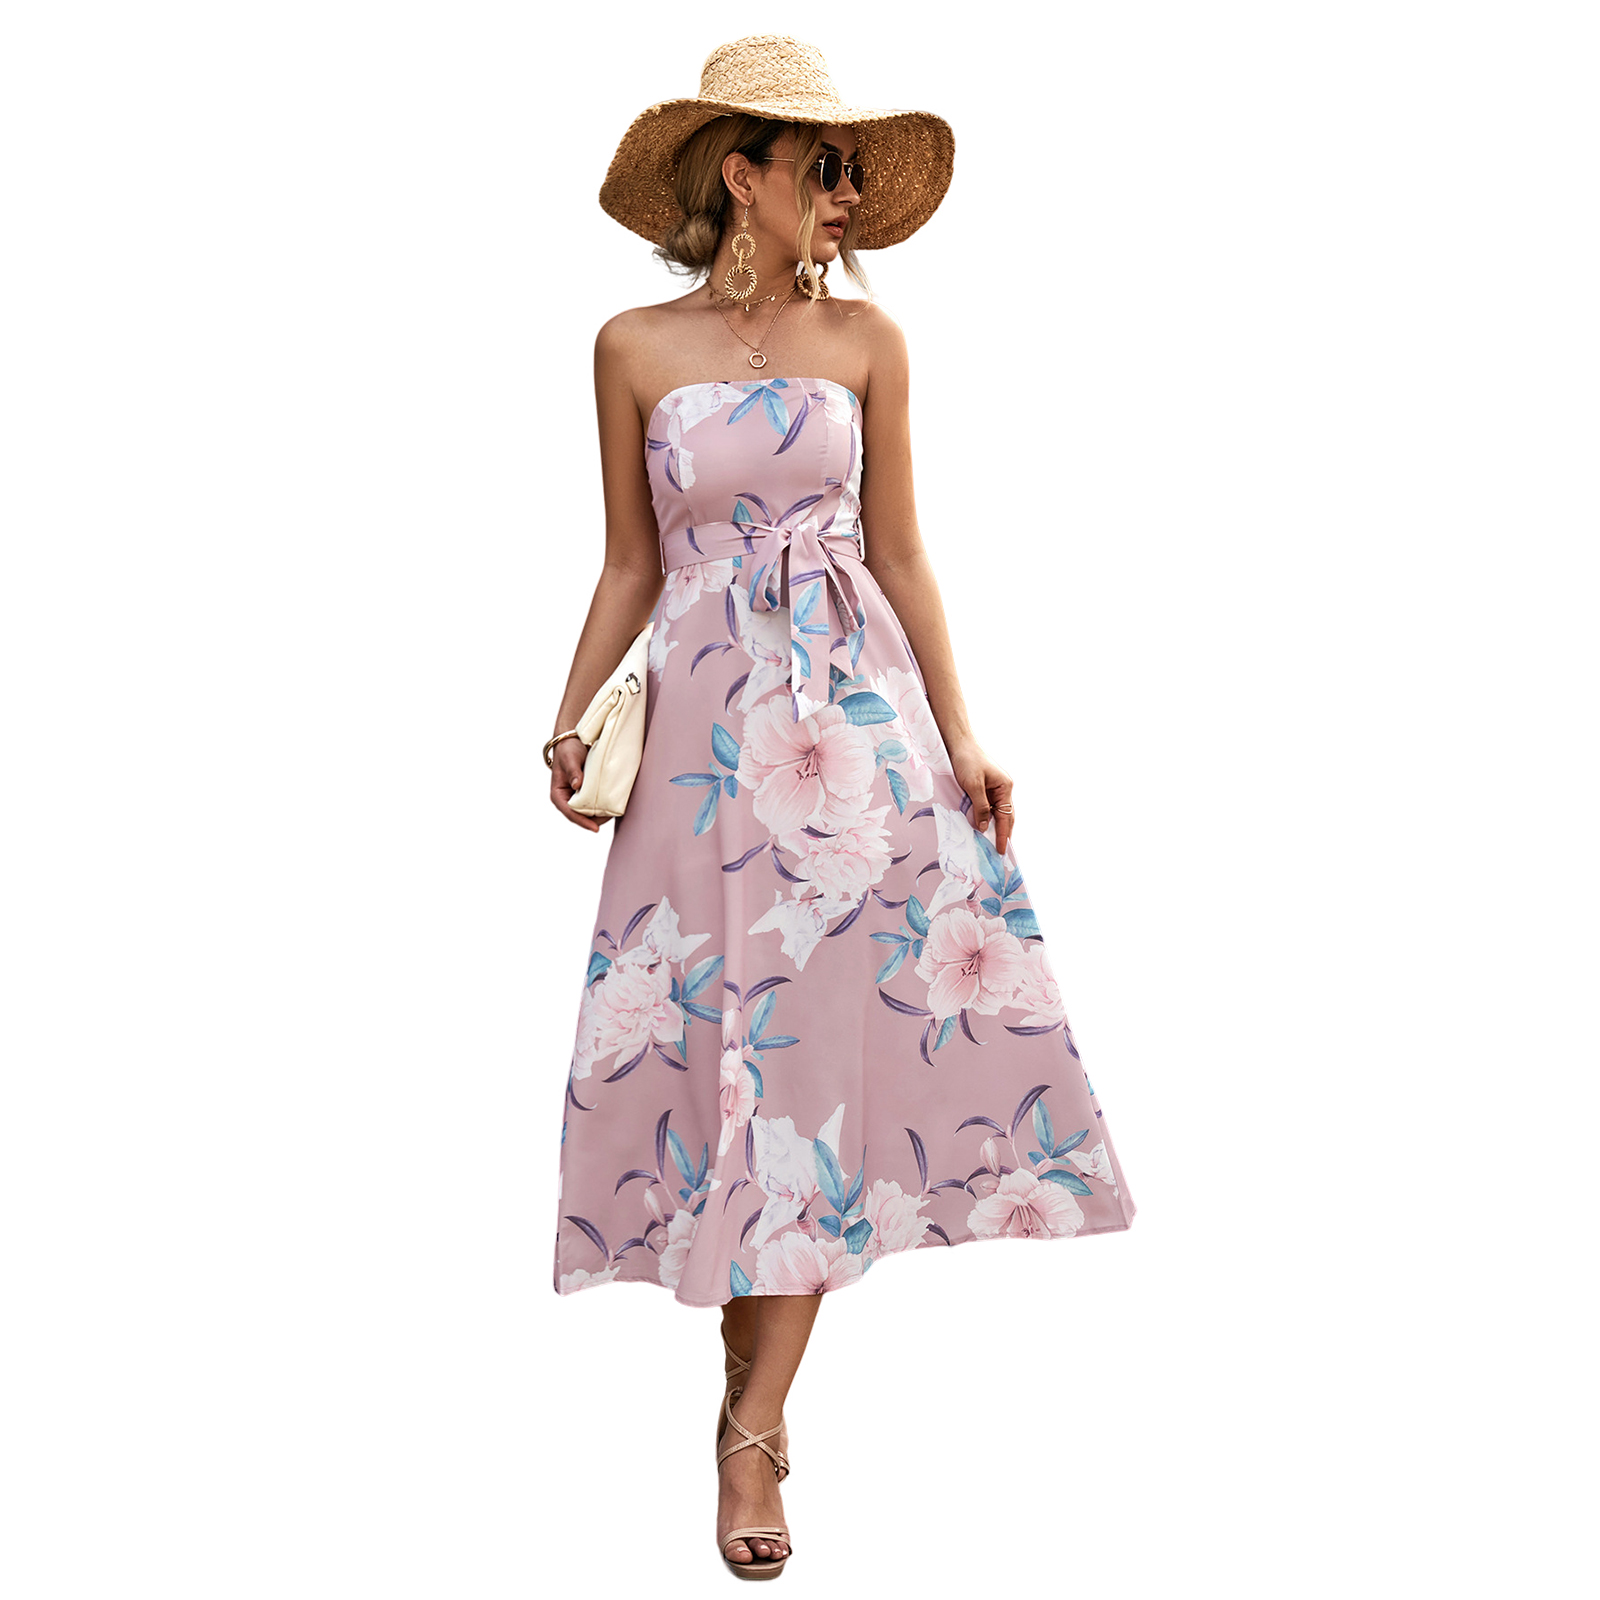 Women Off Shoulder Strapless Dress Sexy Sleeveless High Waist Lace-up Tube Top Midi Skirt Floral Printing A-line Skirt pink XL